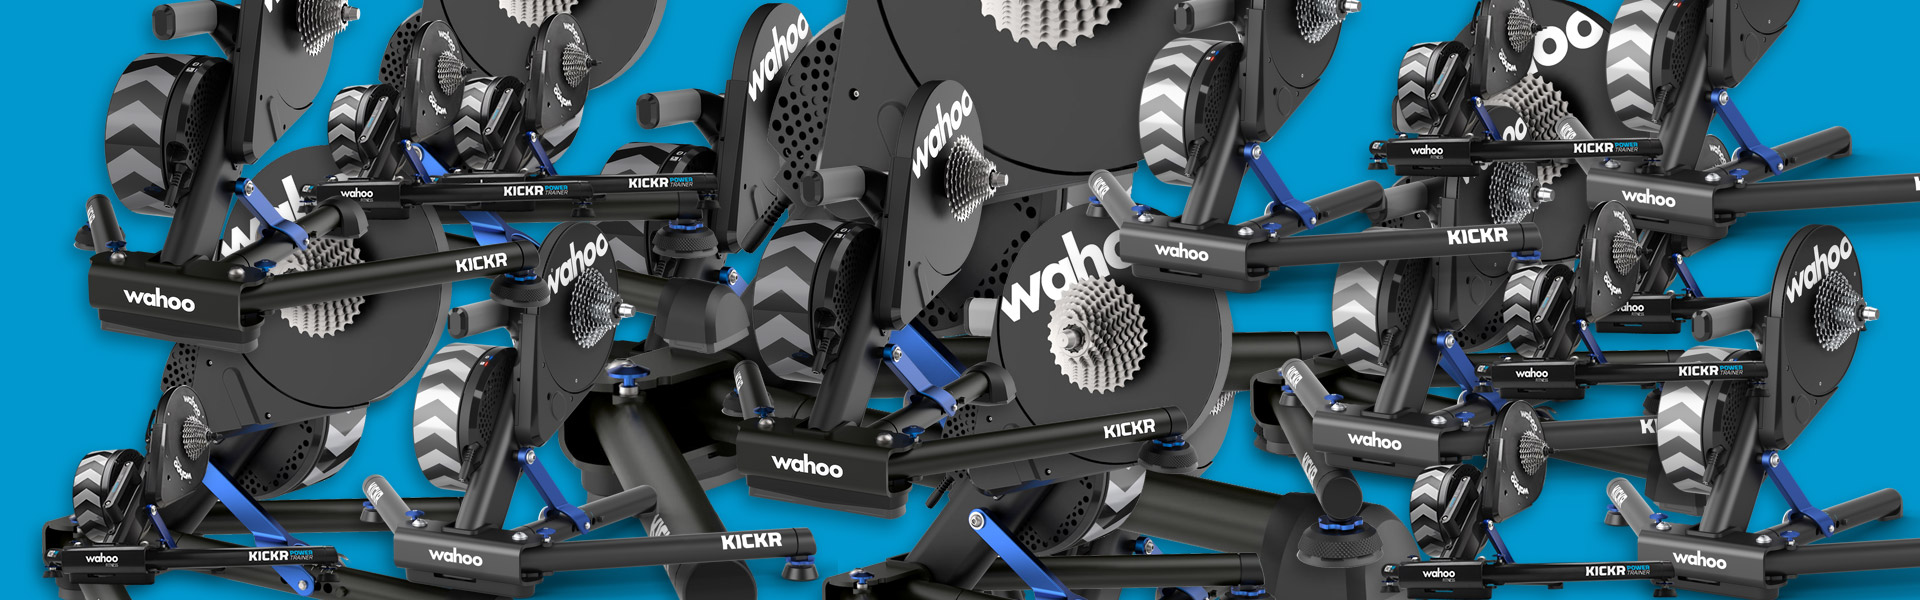 Differences Between Wahoo KICKR Versions | Zwift Insider